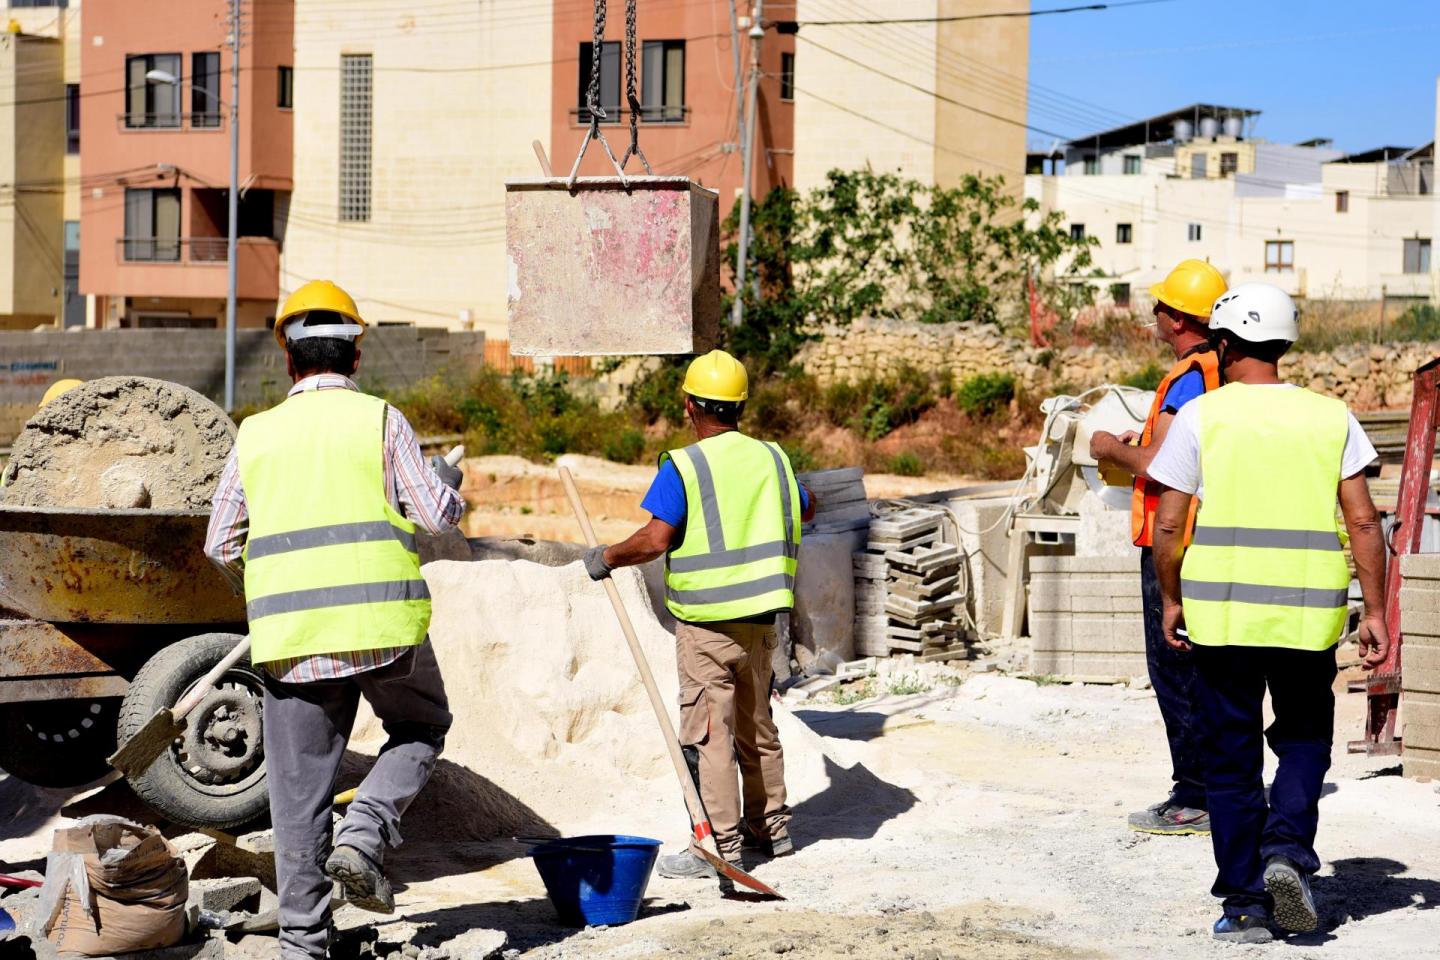 Manual labourers are at an increased risk of developing ALS